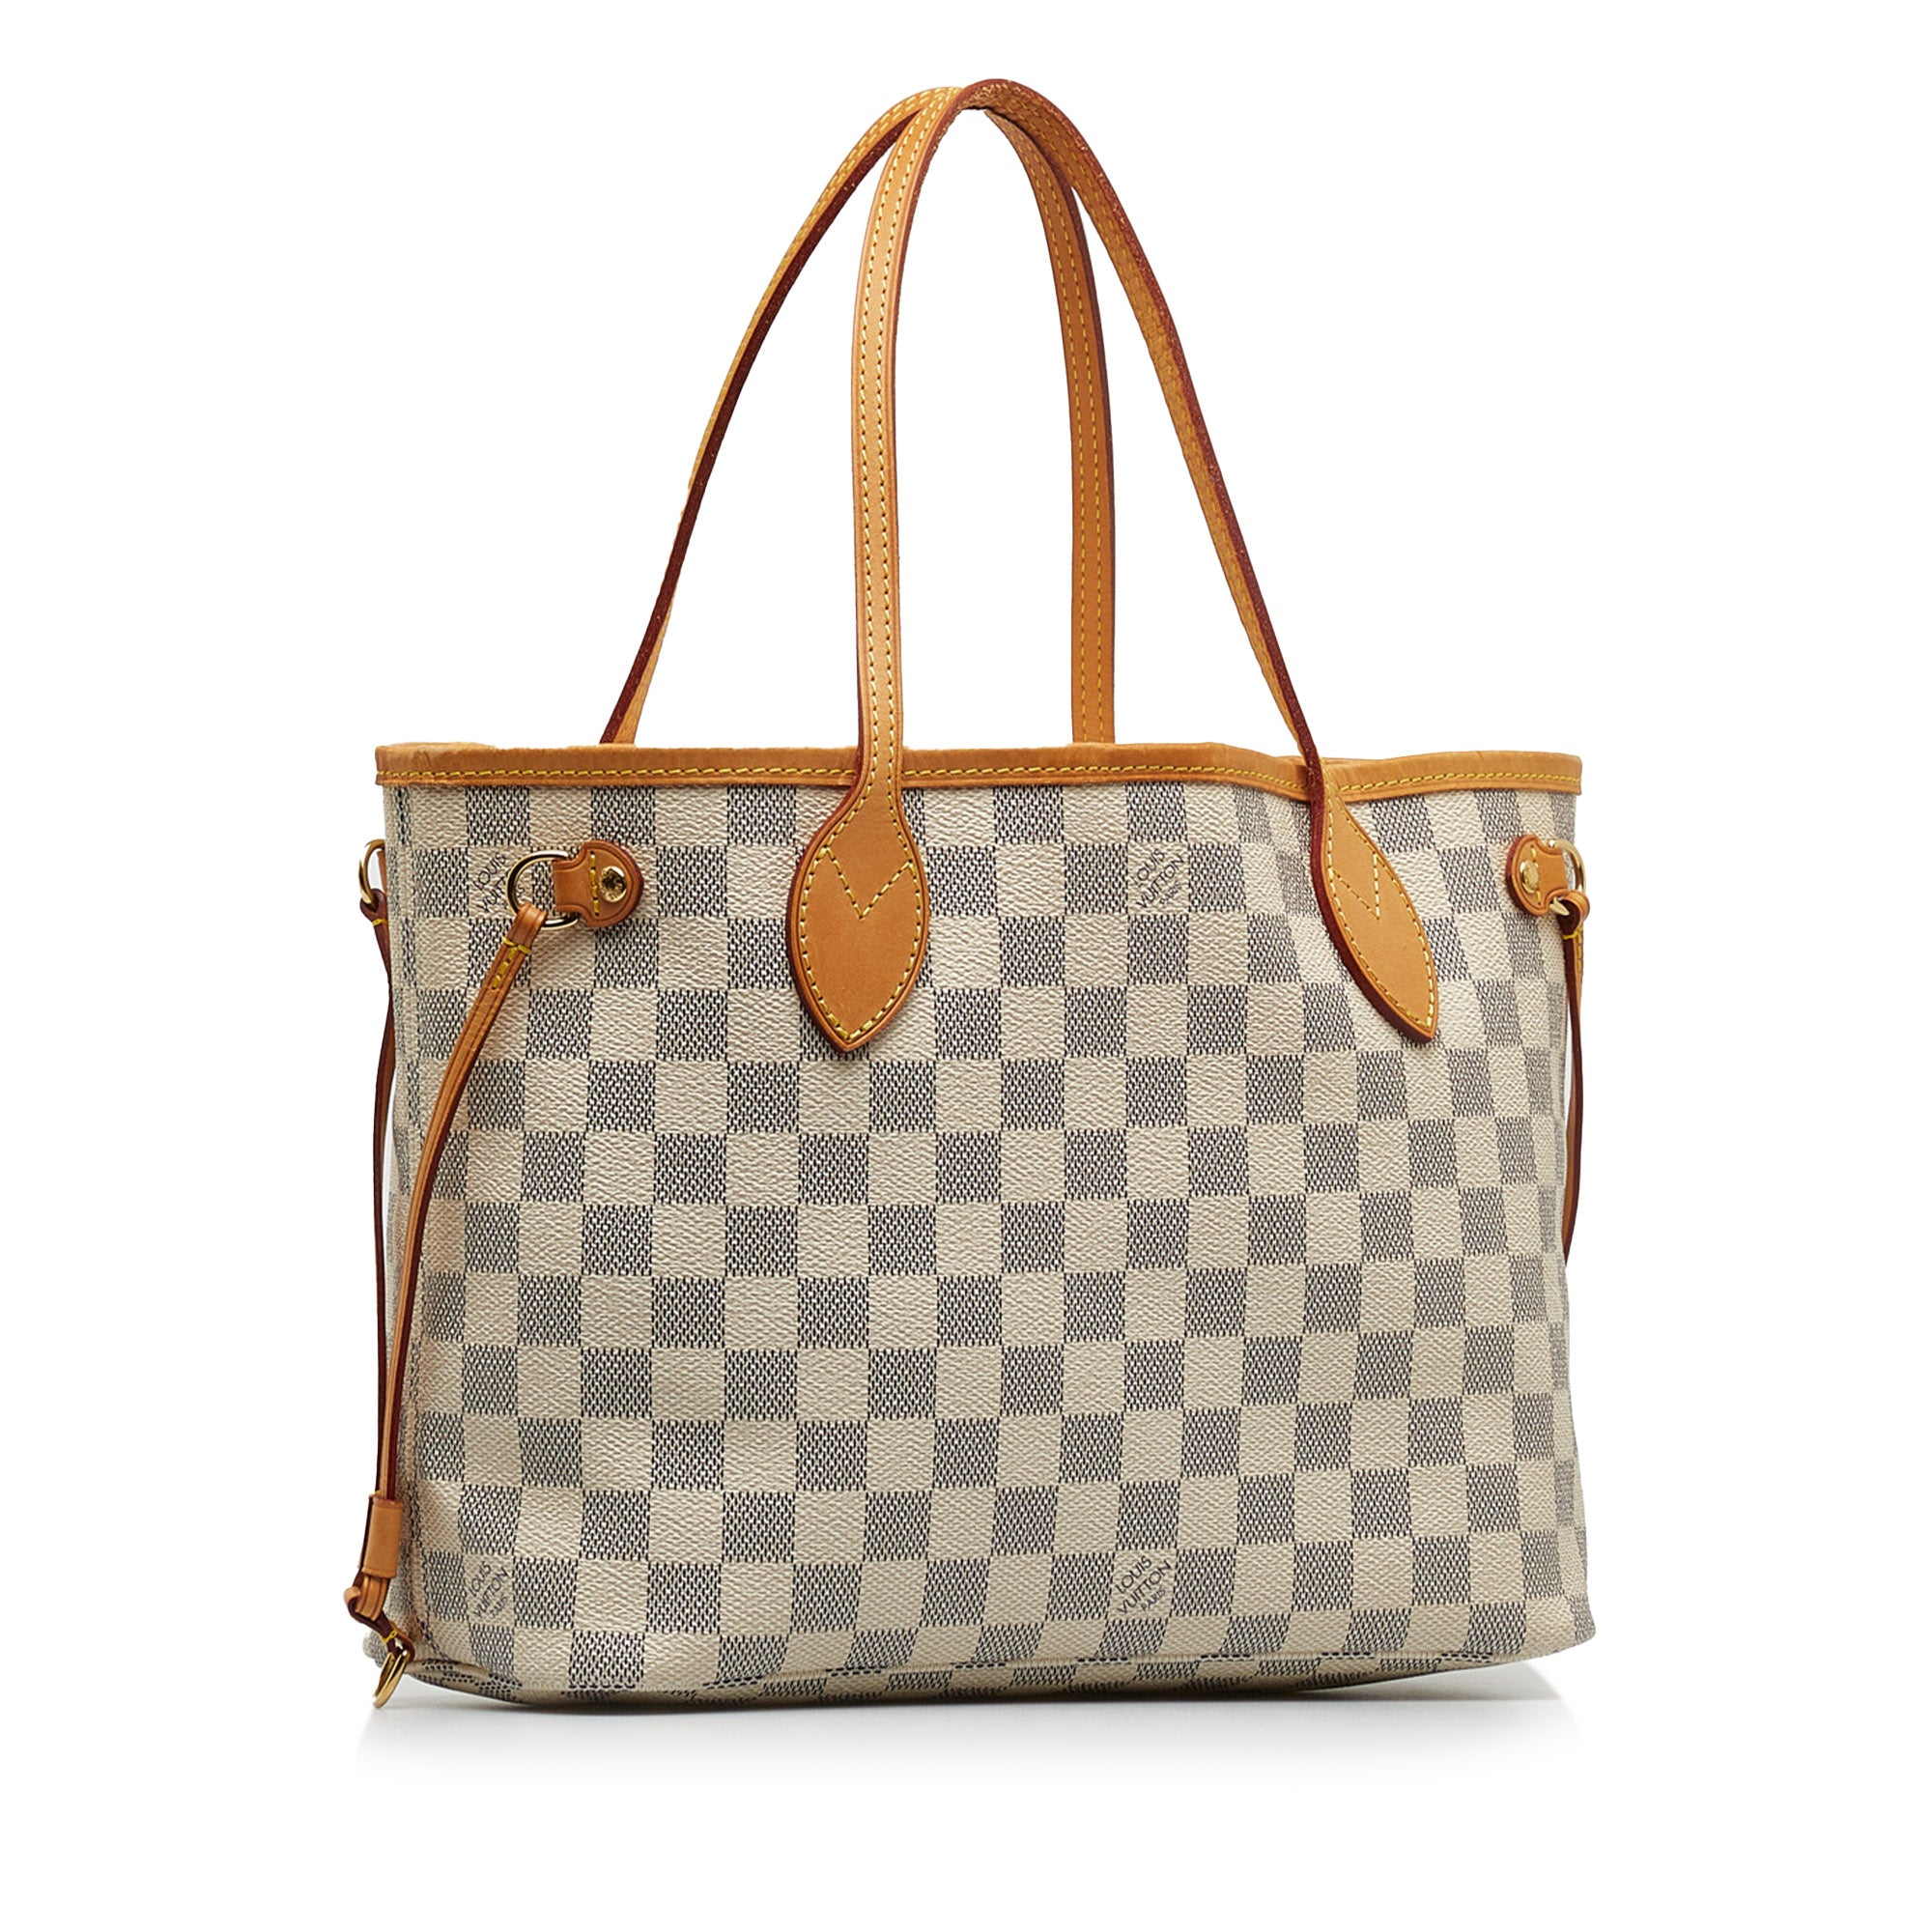 Louis Vuitton Neverfull Pm in White